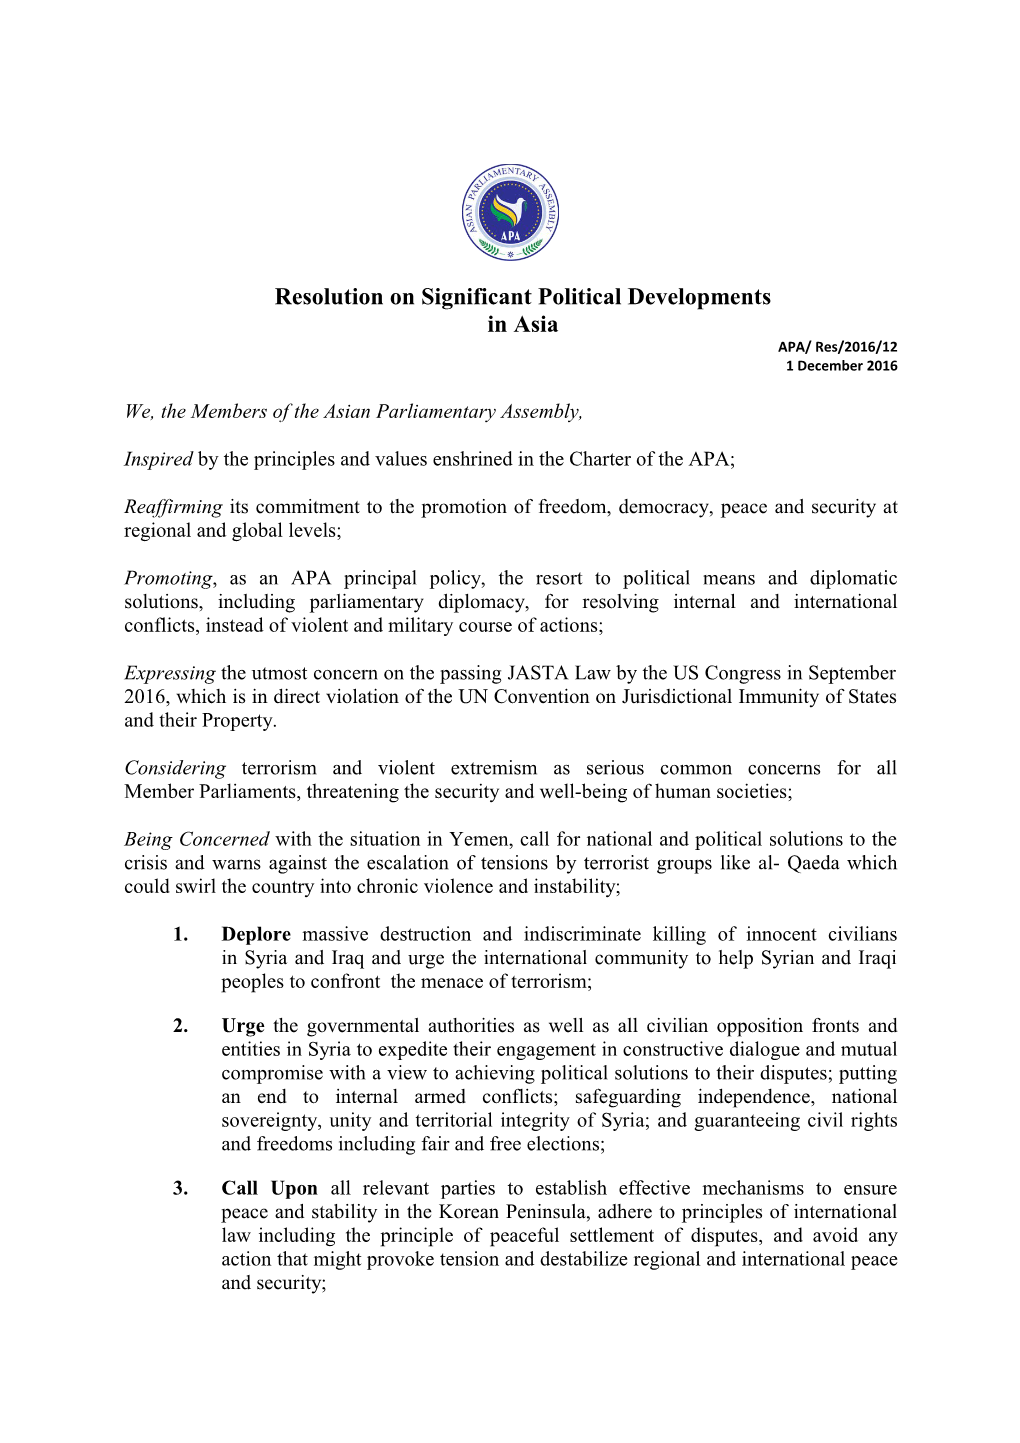 Resolution on Significant Political Developments in Asia